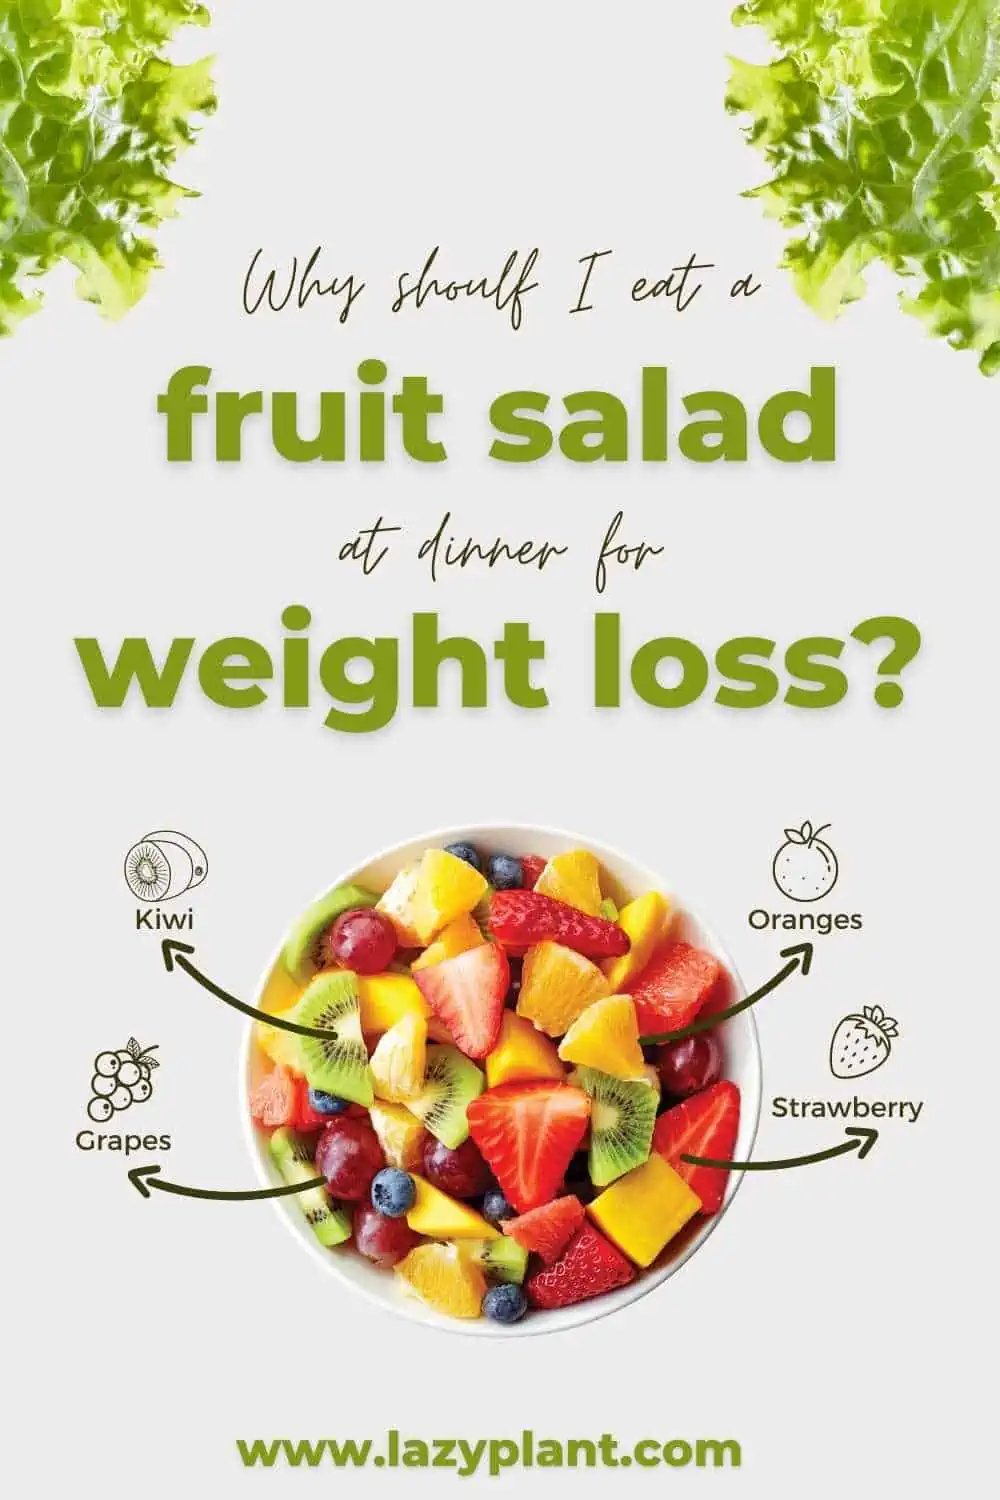 Is dinner a good time to eat a cup of fruit salad If I want to lose weight?